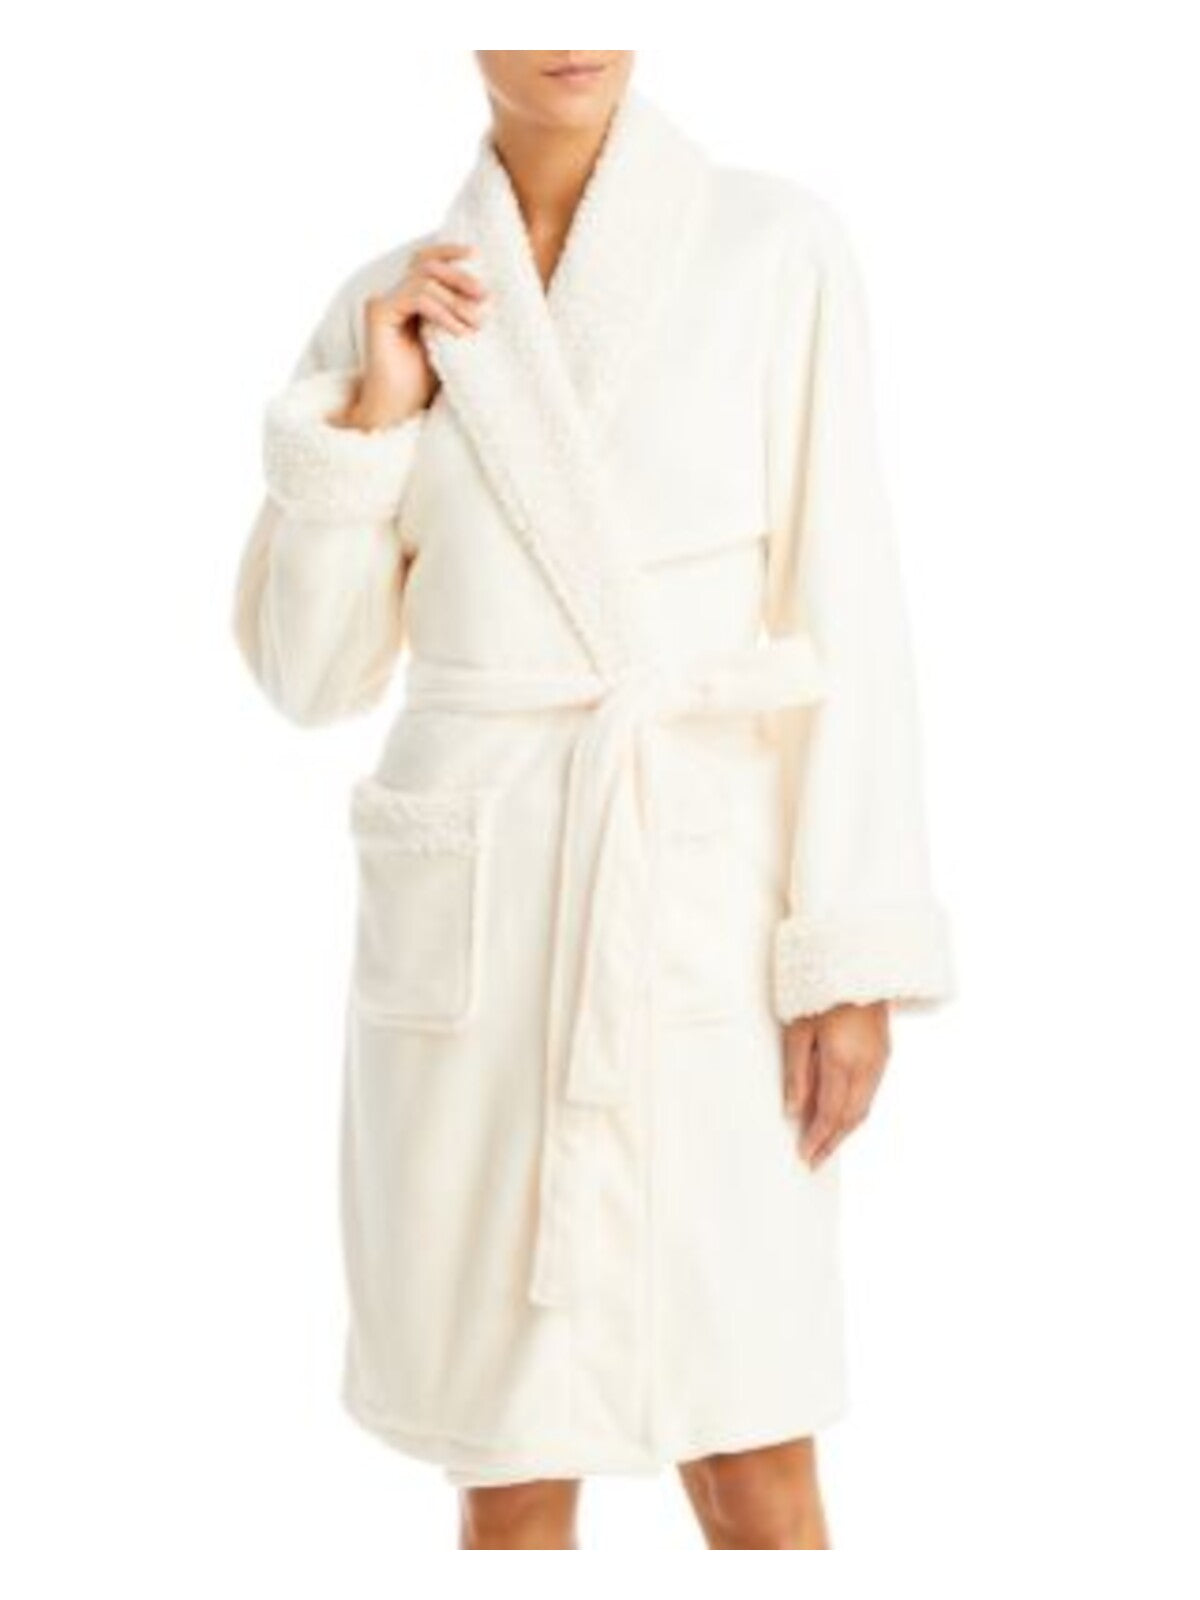 HUDSON PARK COLLECTION Intimates Beige Pocketed Robe L\XL